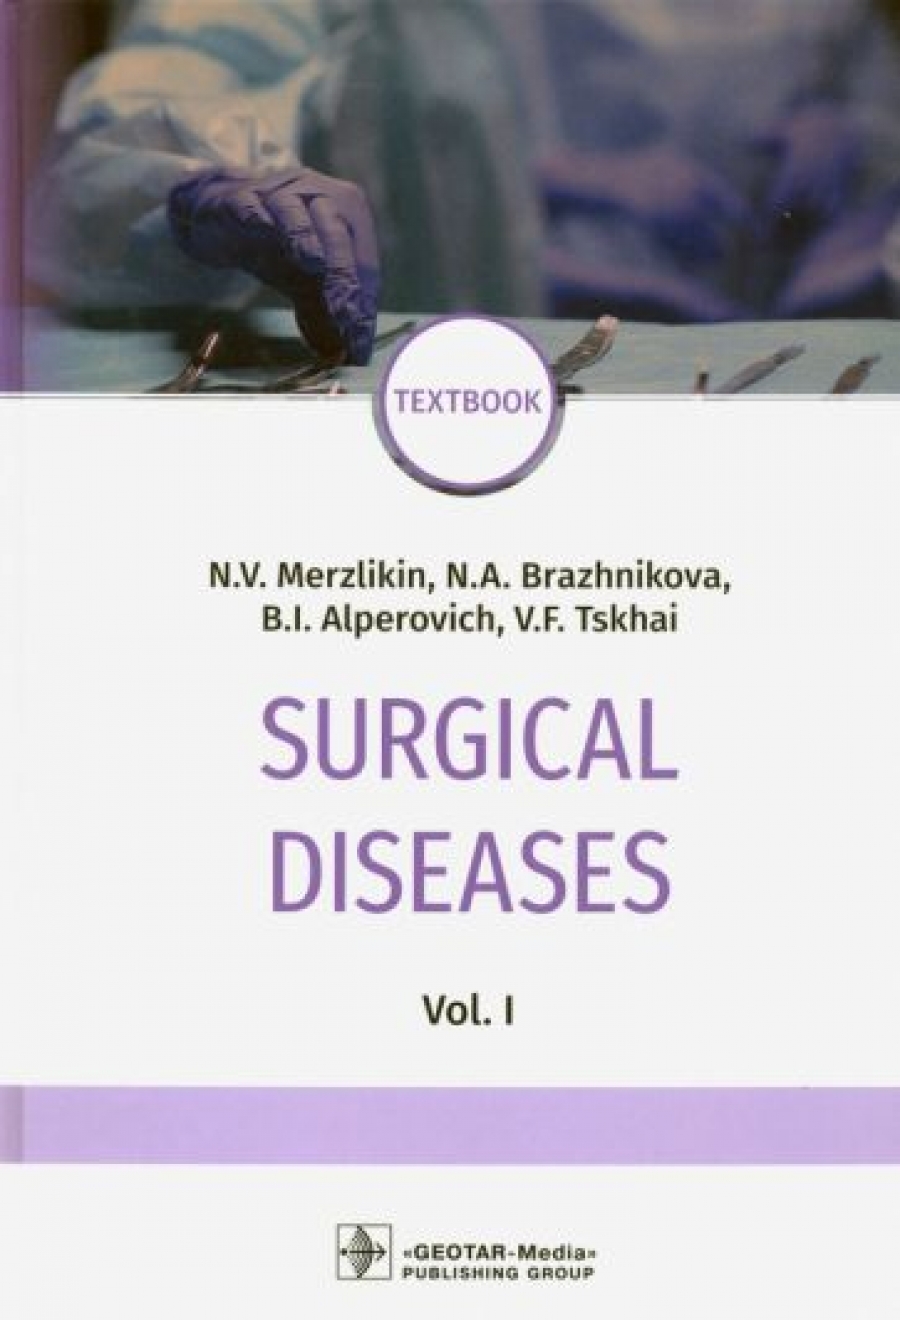  ..,  ..,  ..,  .. Surgical diseases. Textbook in 2 vol. Vol. 1 